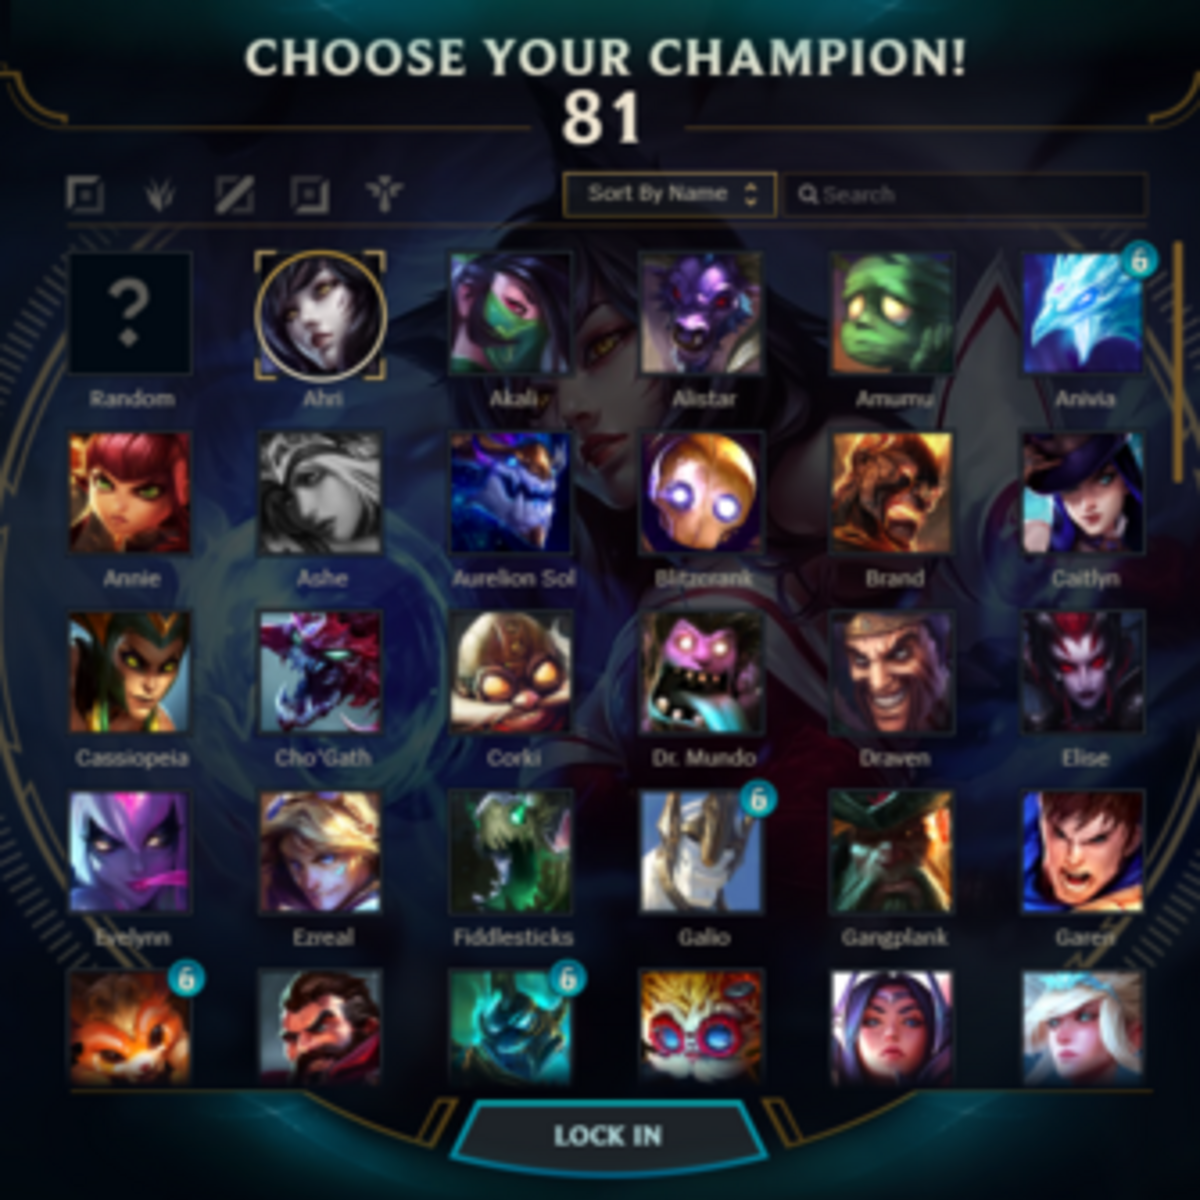 league of legends champions - Google Search  League of legends, Lol league  of legends, League